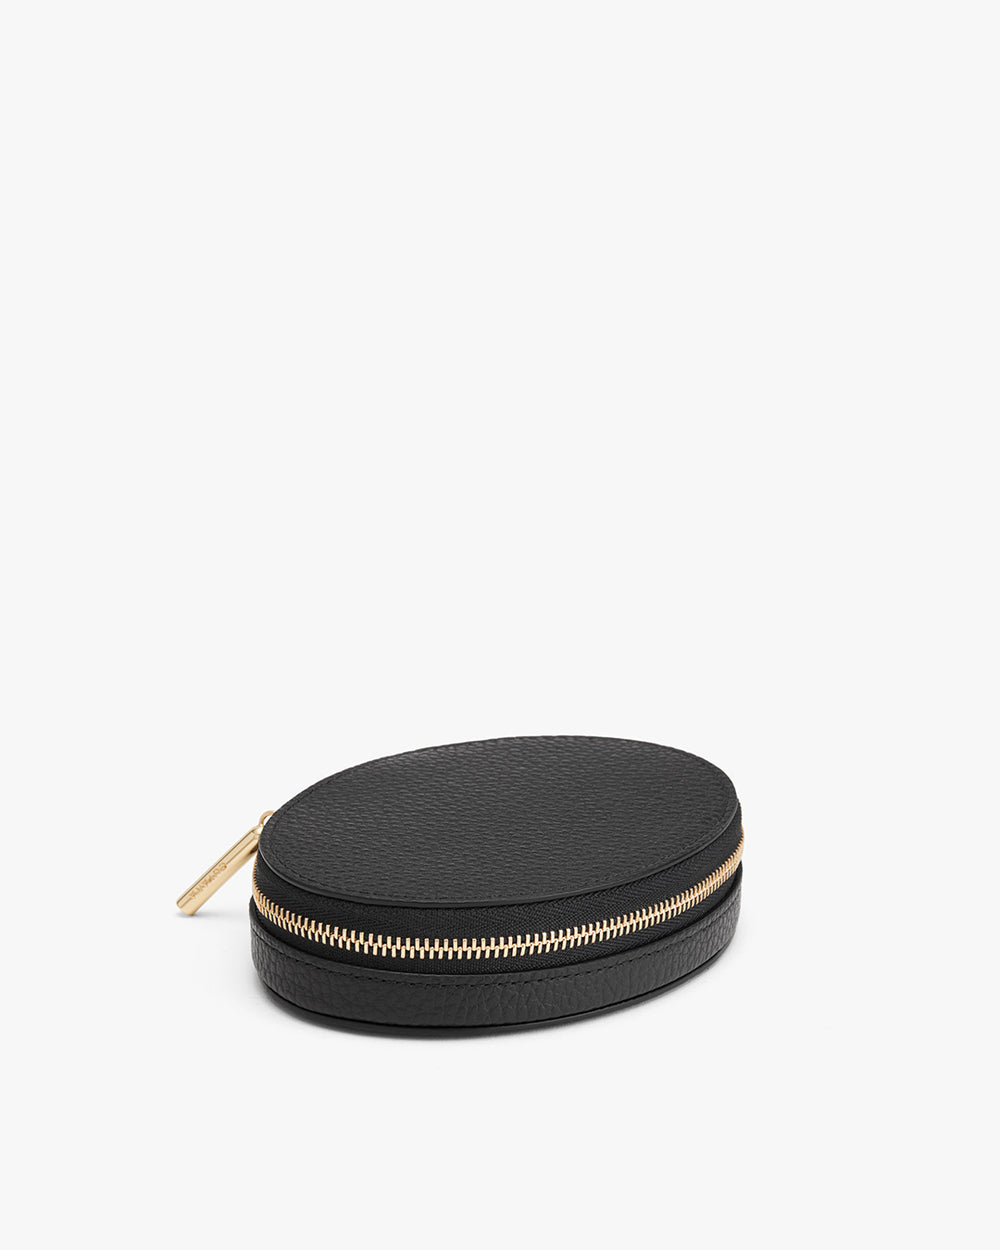 Round zippered case with a textured surface and a metallic zipper pull.